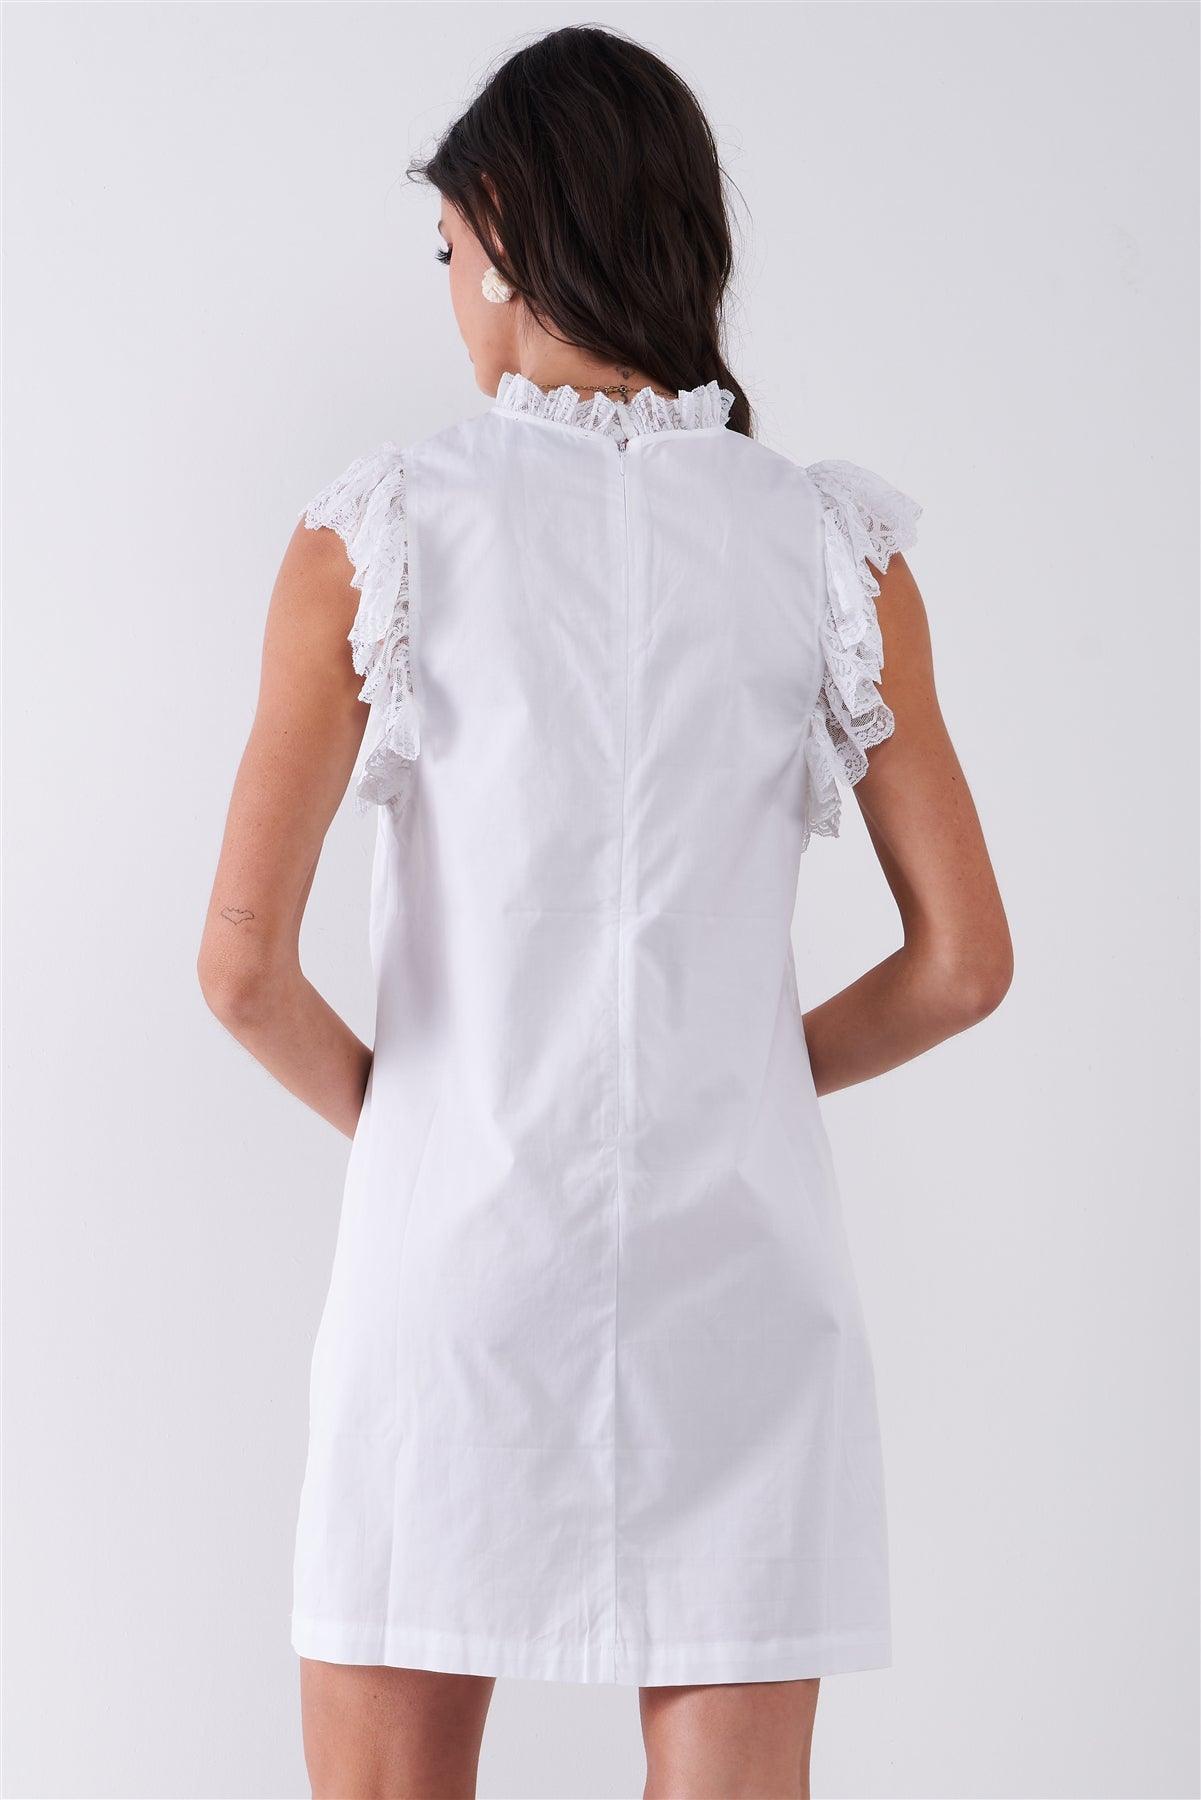 White Solid Sleeveless Lace Frill Trim Relaxed Mini Dress /1-2-2-1